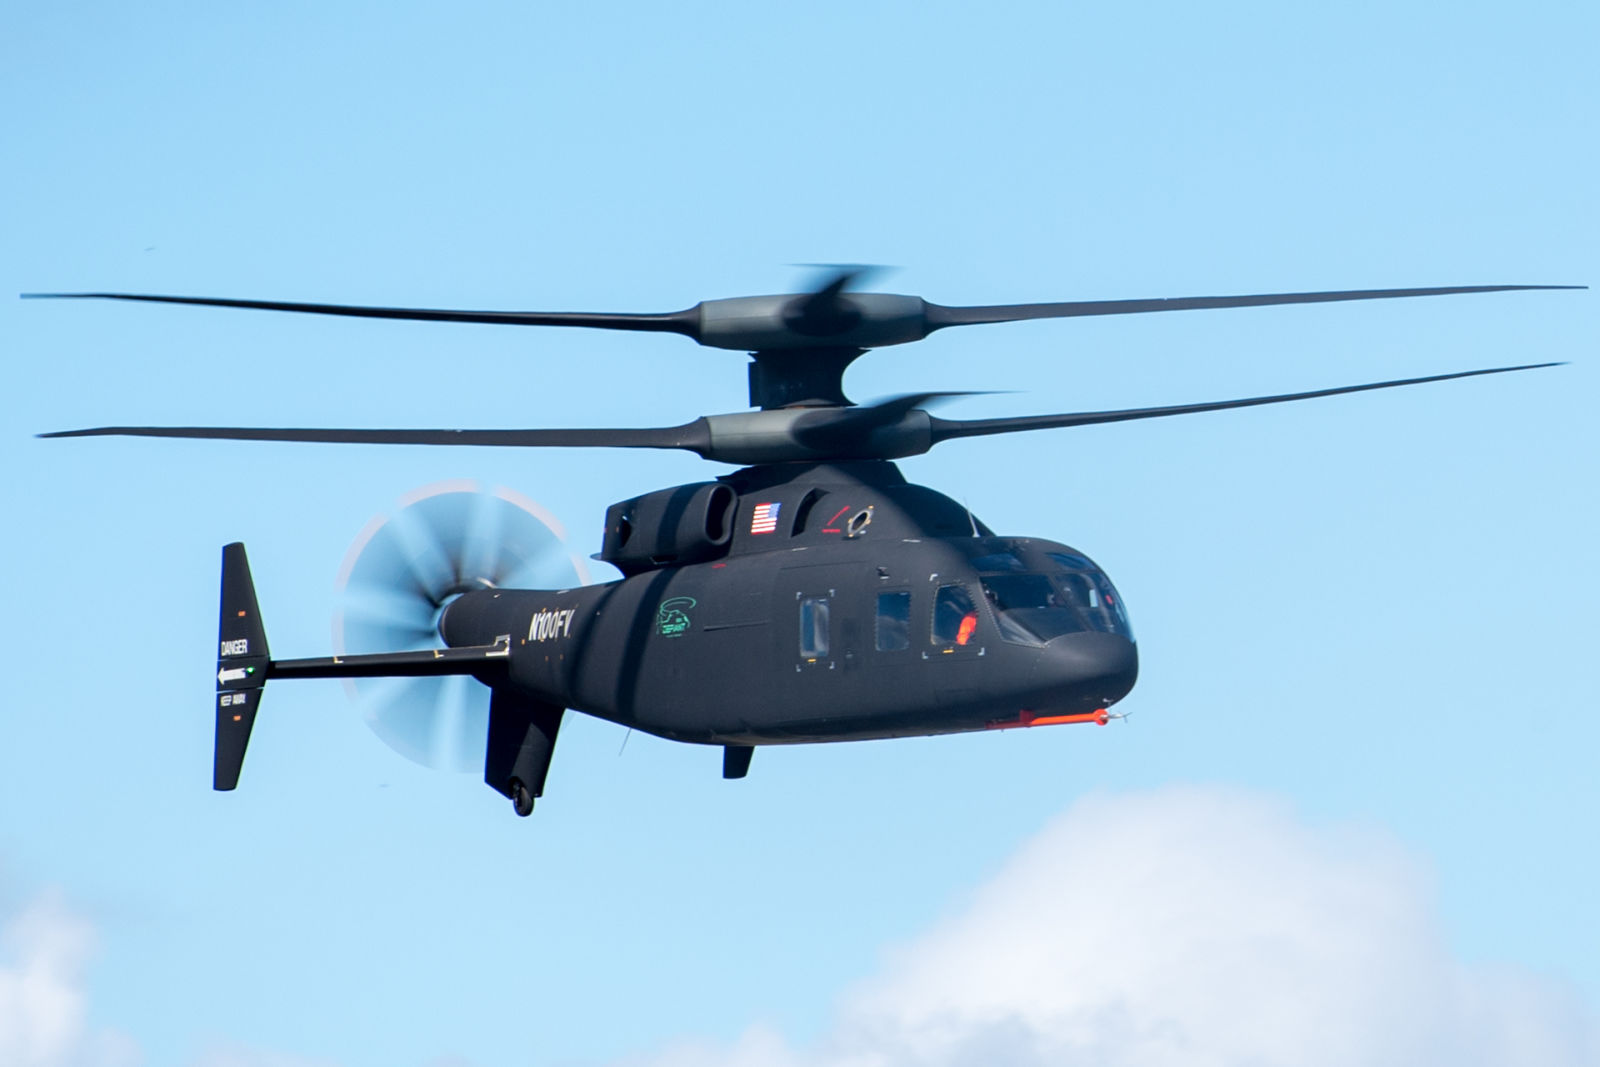 The Sikorsky/Boeing SB-1 Defiant during a flight demo